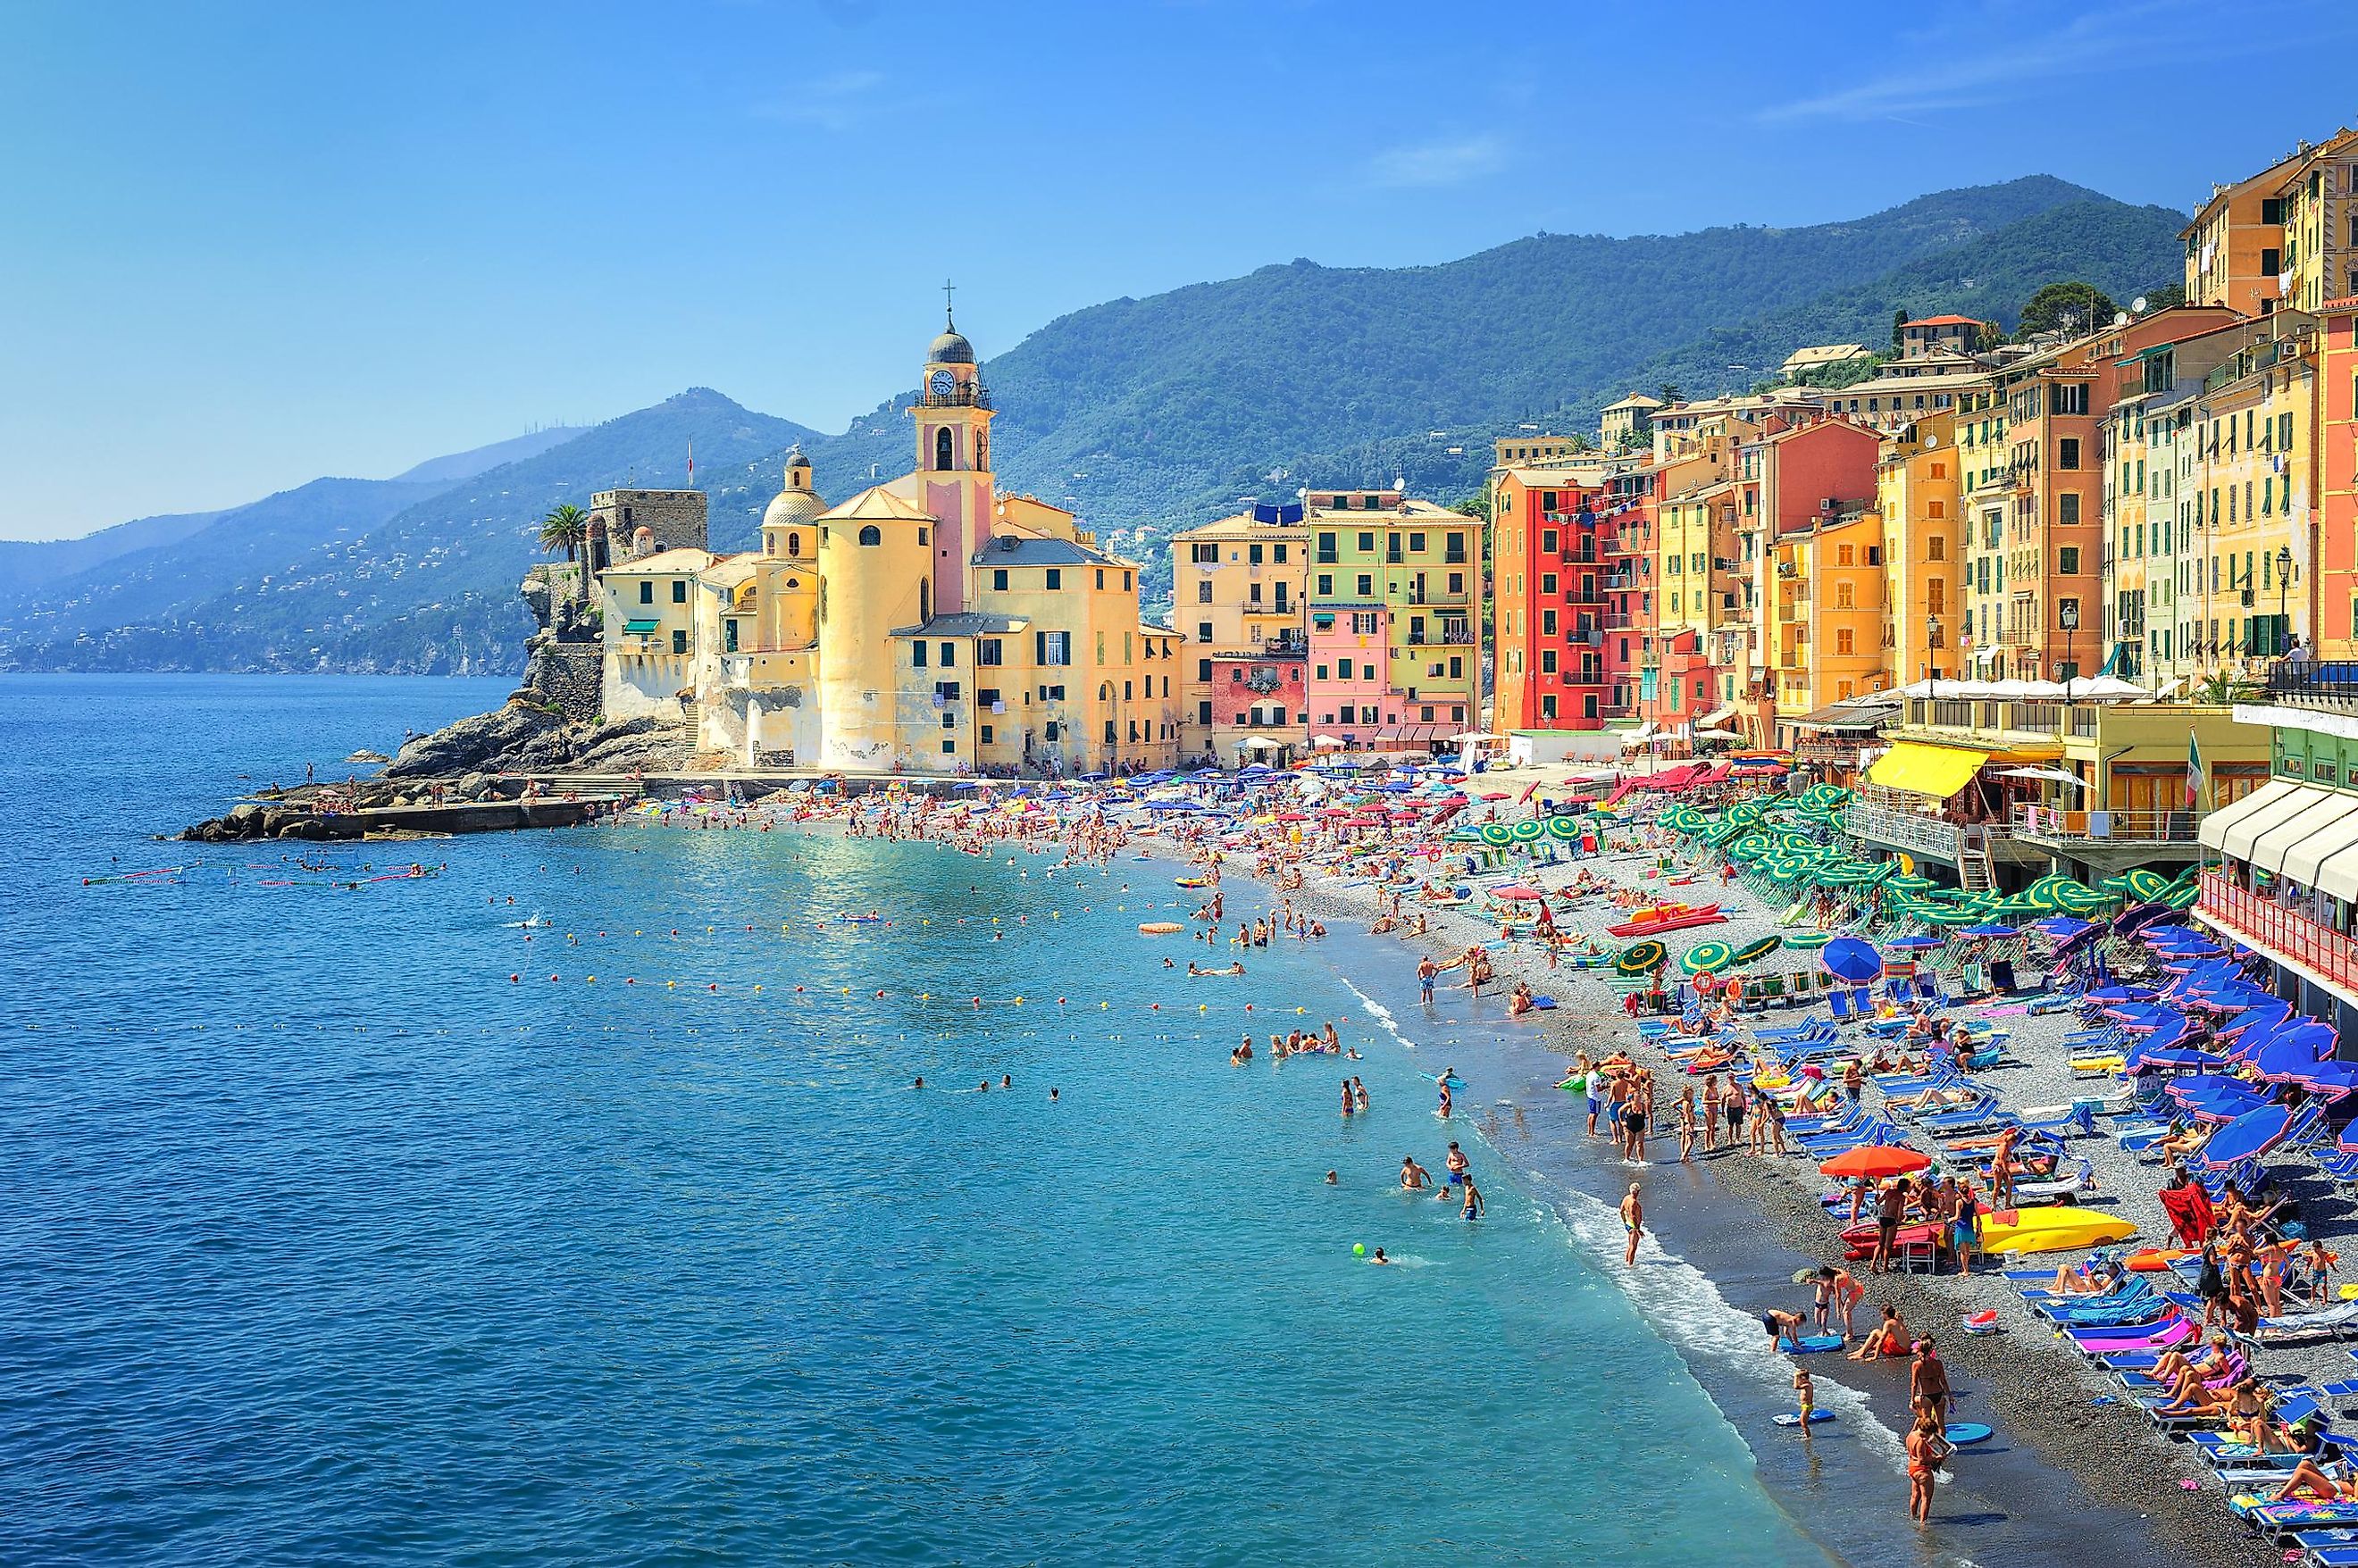 The picturesque city of Genoa on the shores of the Gulf of Genoa.